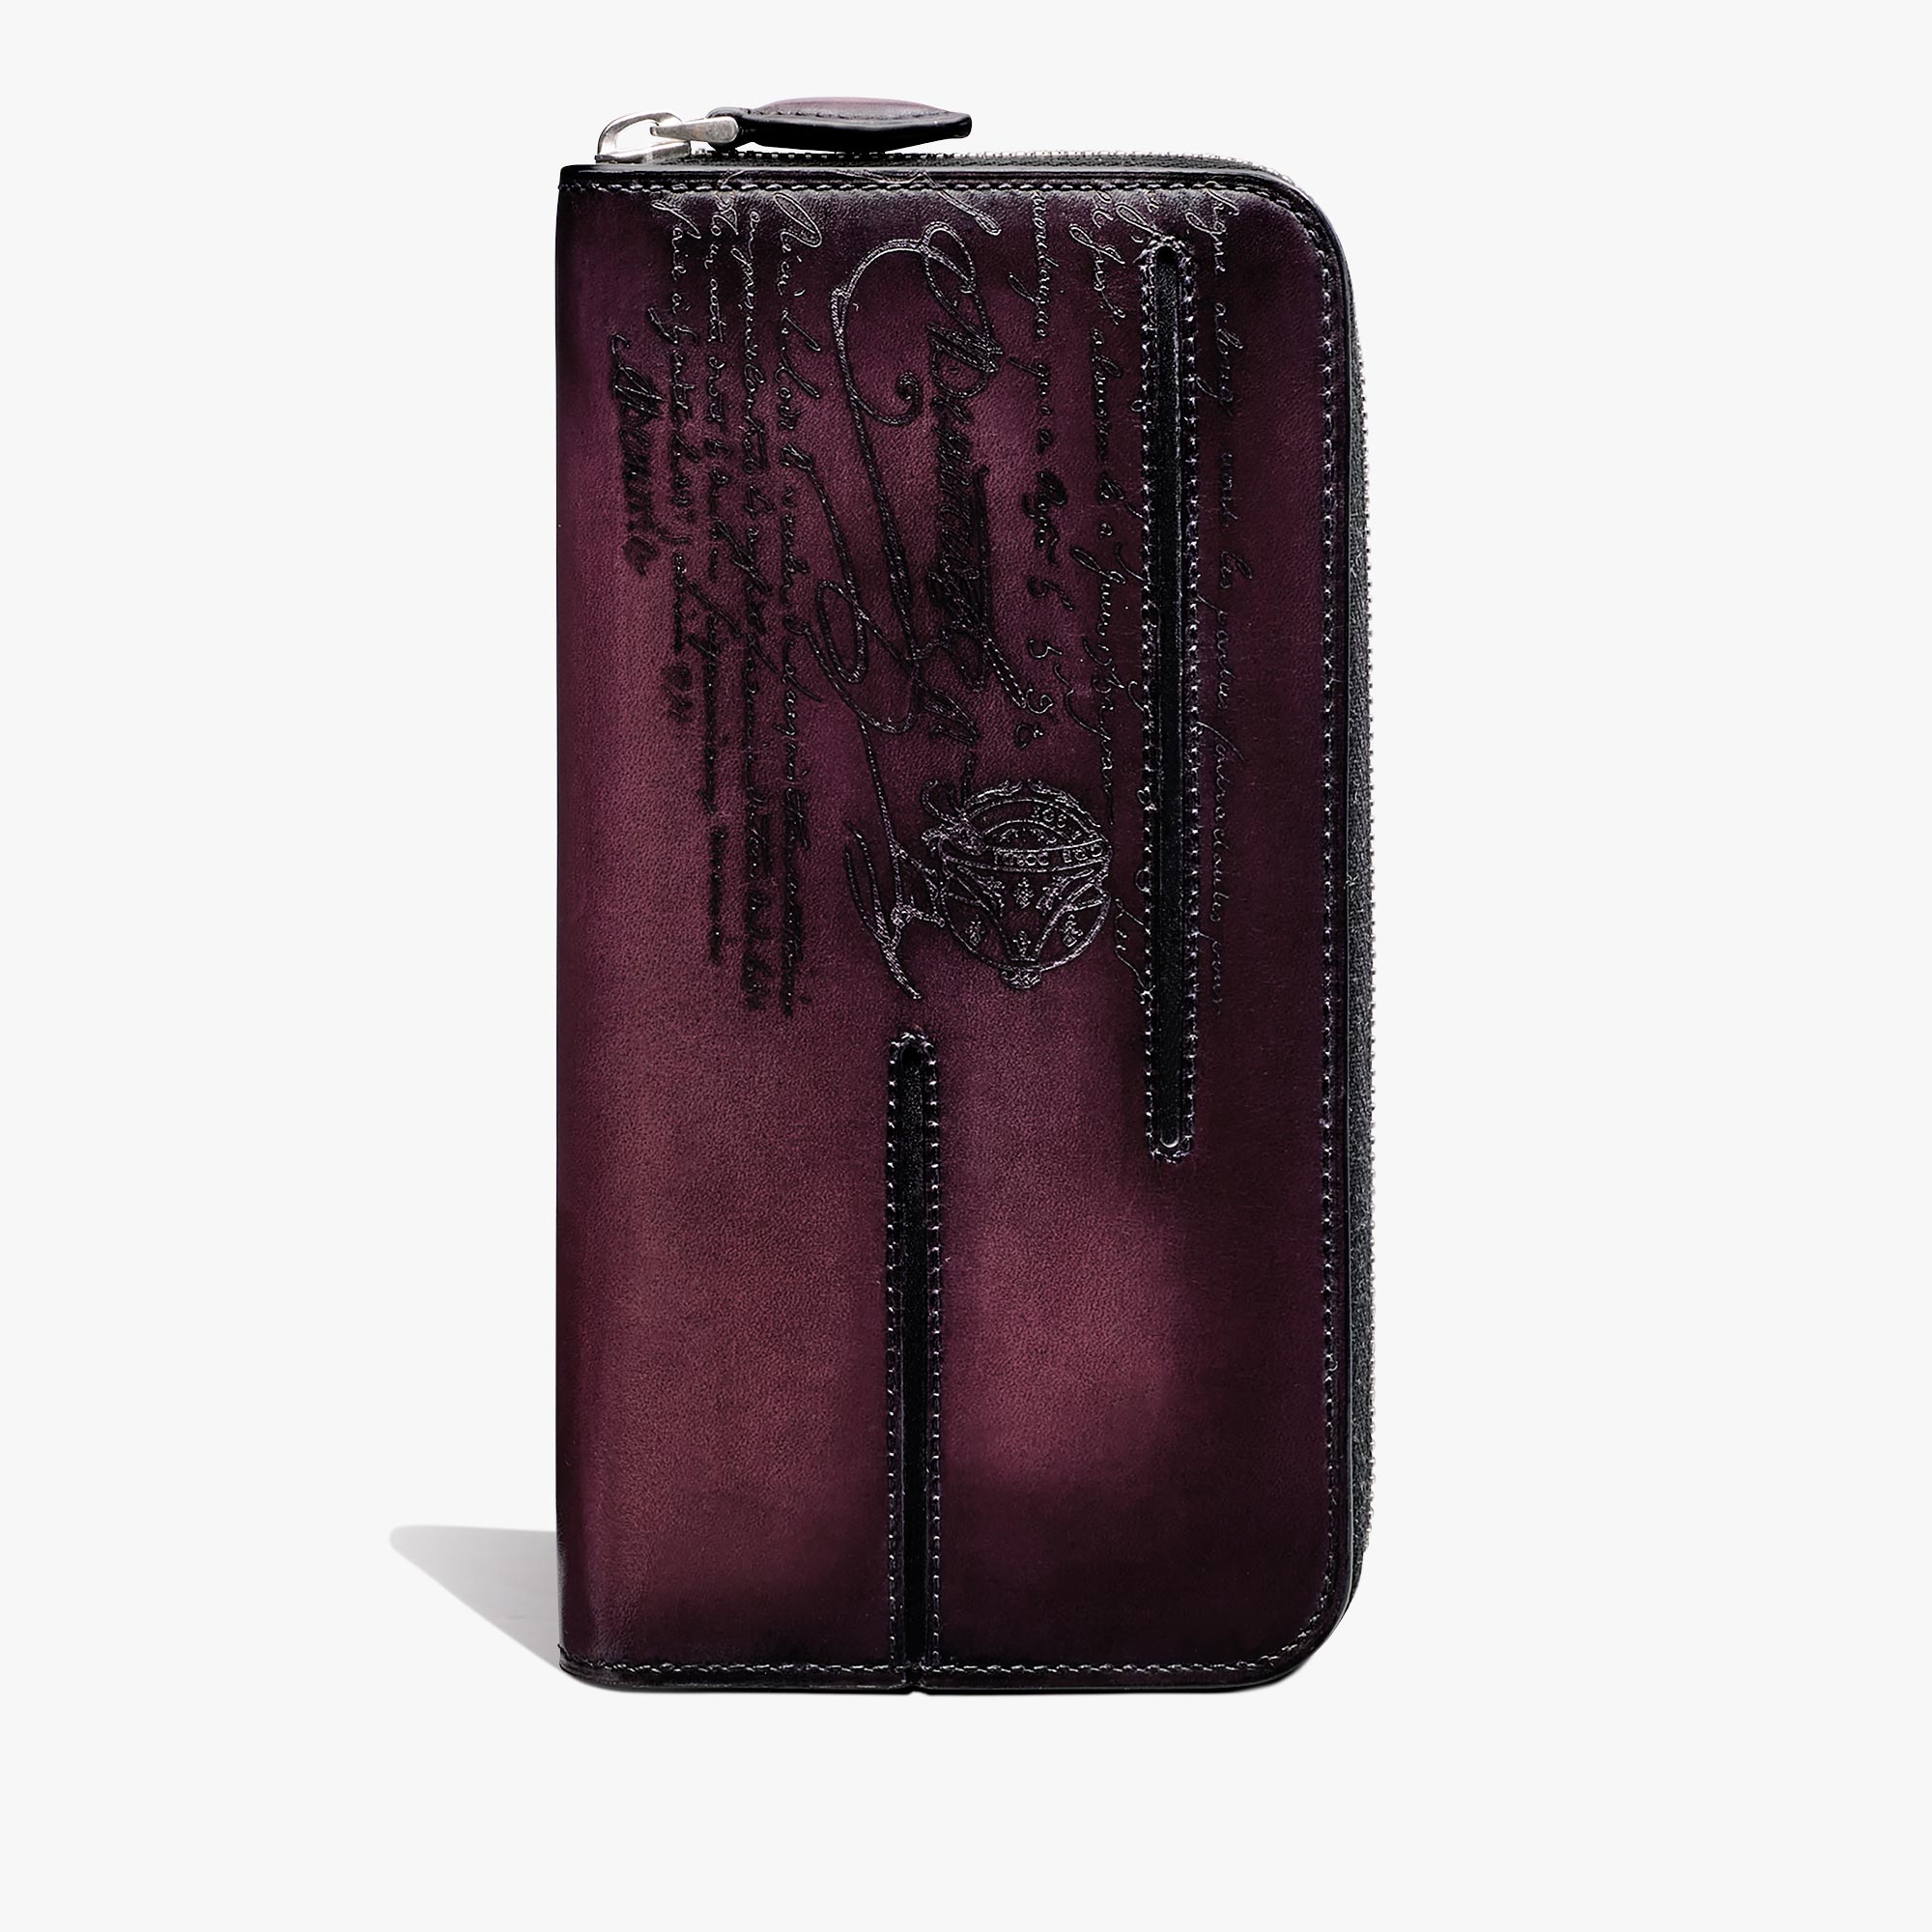 Itauba Scritto Leather Long Zipped Wallet, GRAPES, hi-res